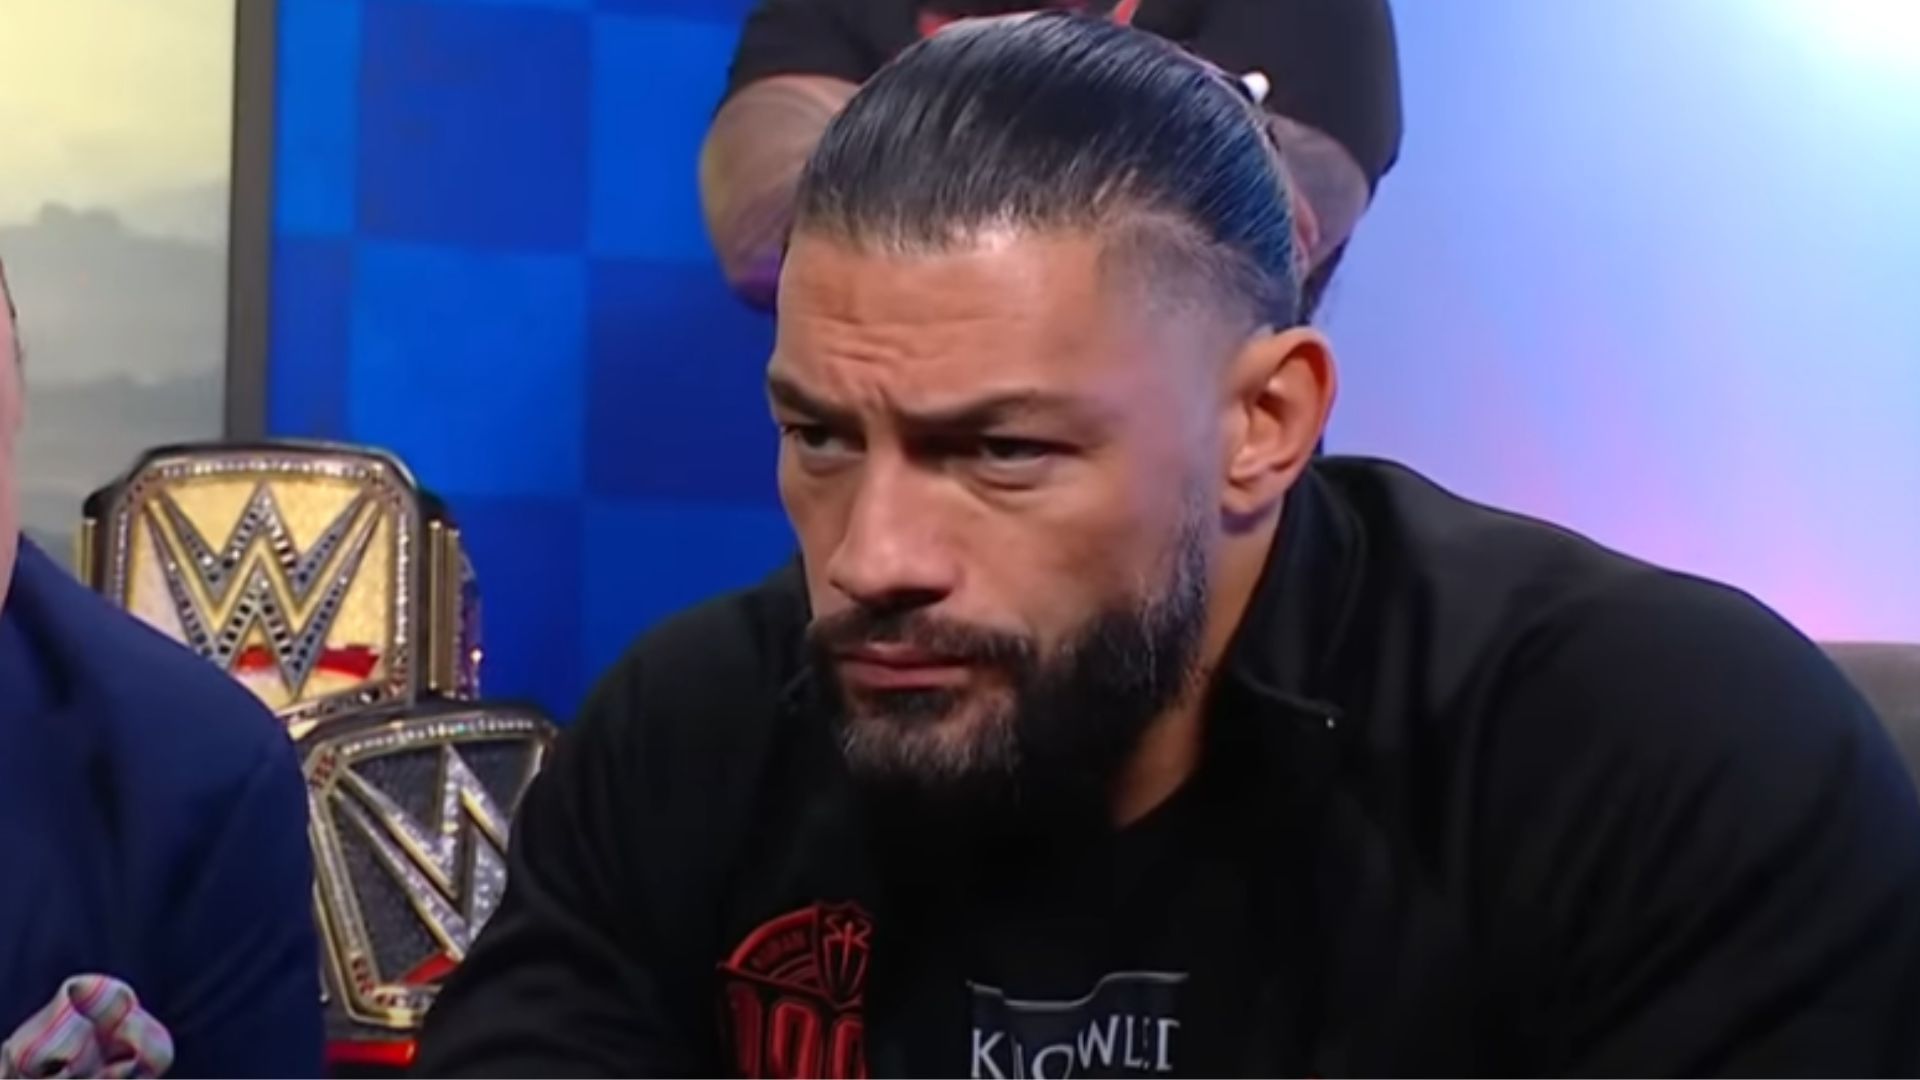 Roman Reigns has been a world champion since 2020